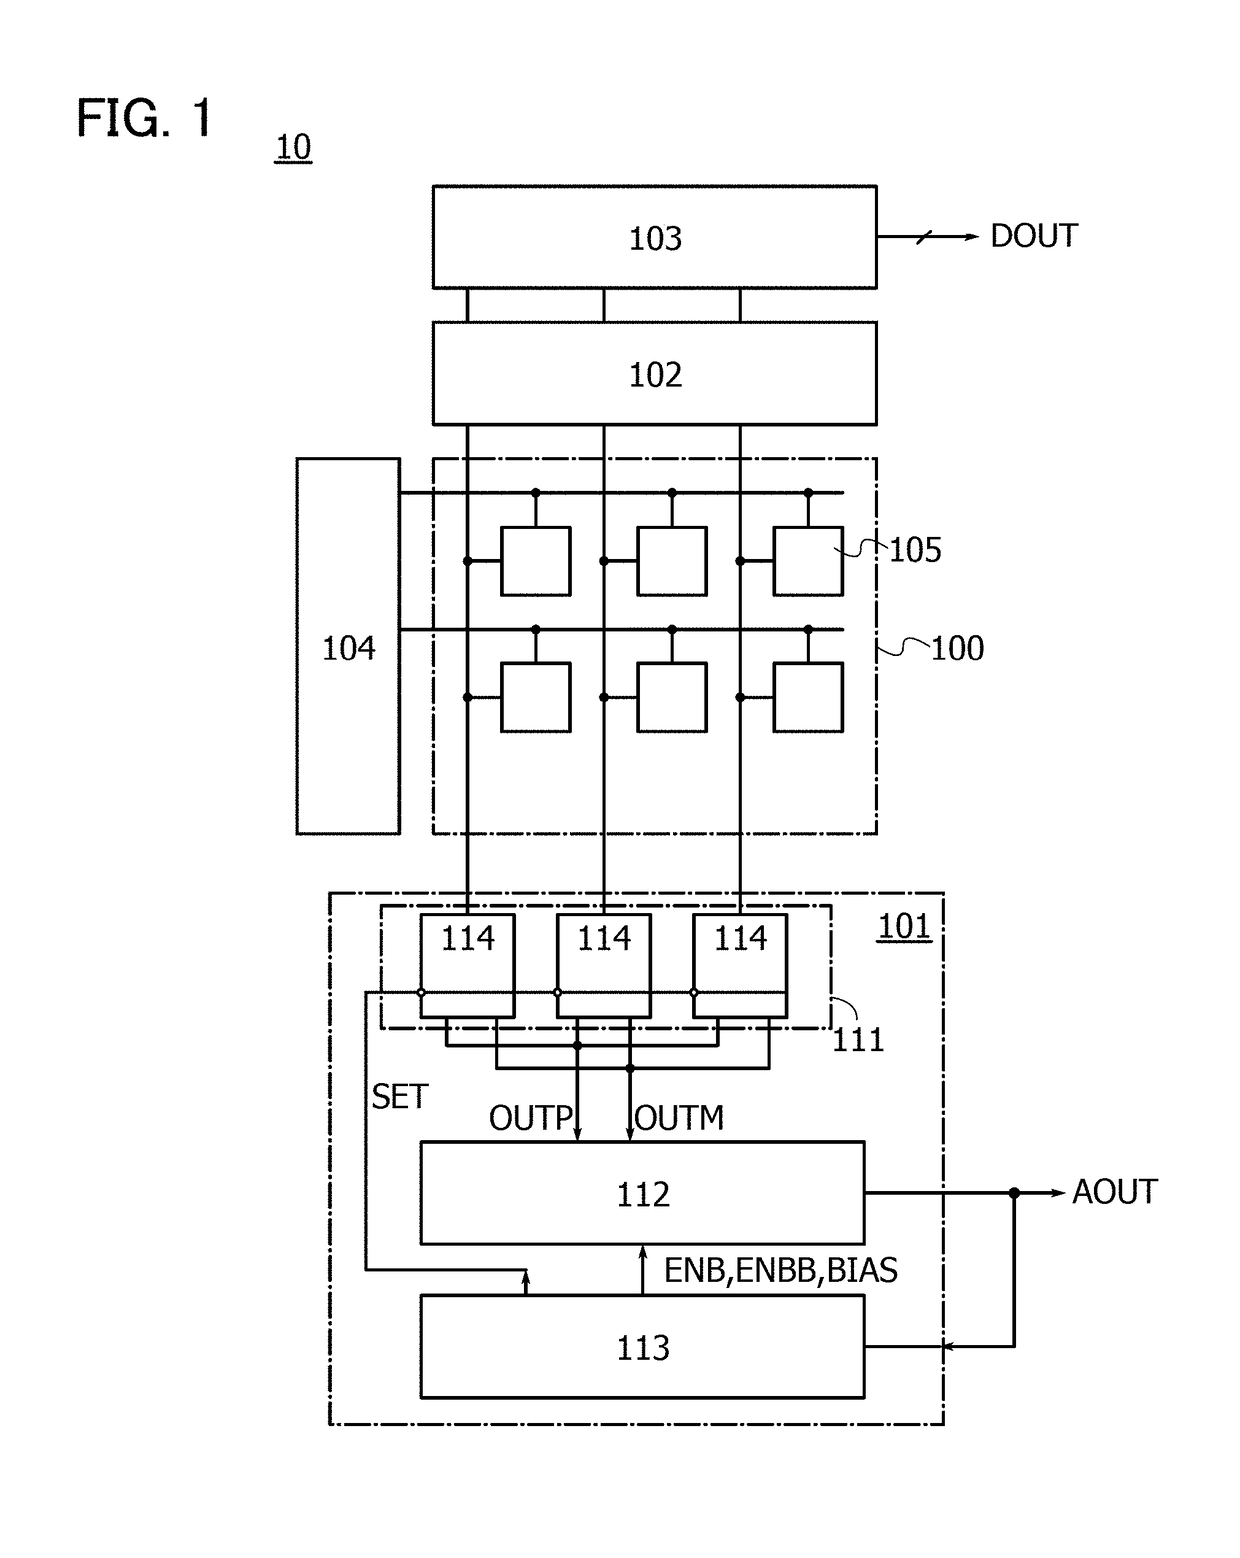 Imaging device, monitoring device, and electronic device